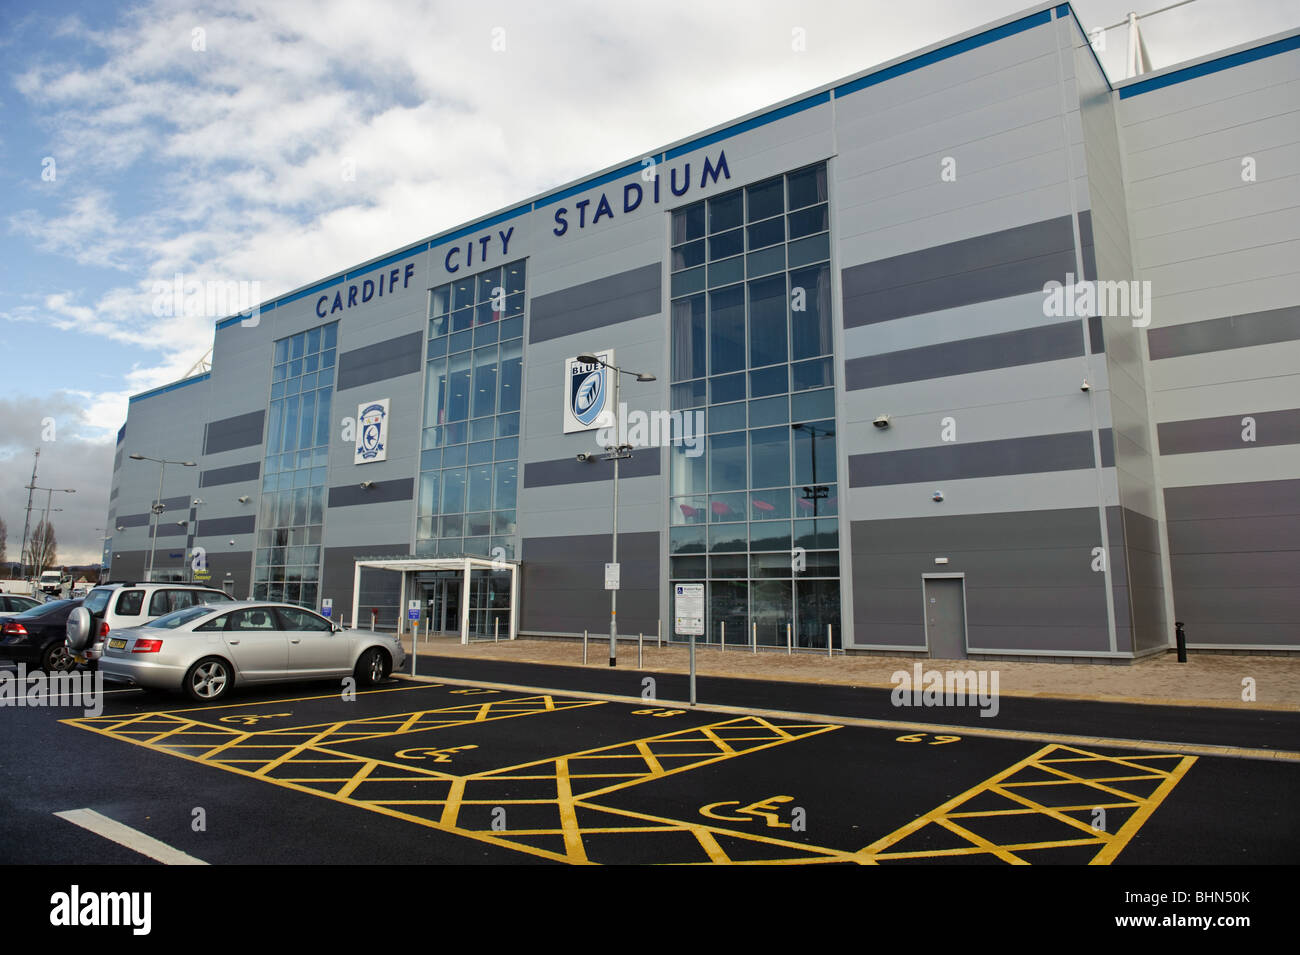 Cardiff City Football club nouveau stadium, Cardiff Wales UK Banque D'Images